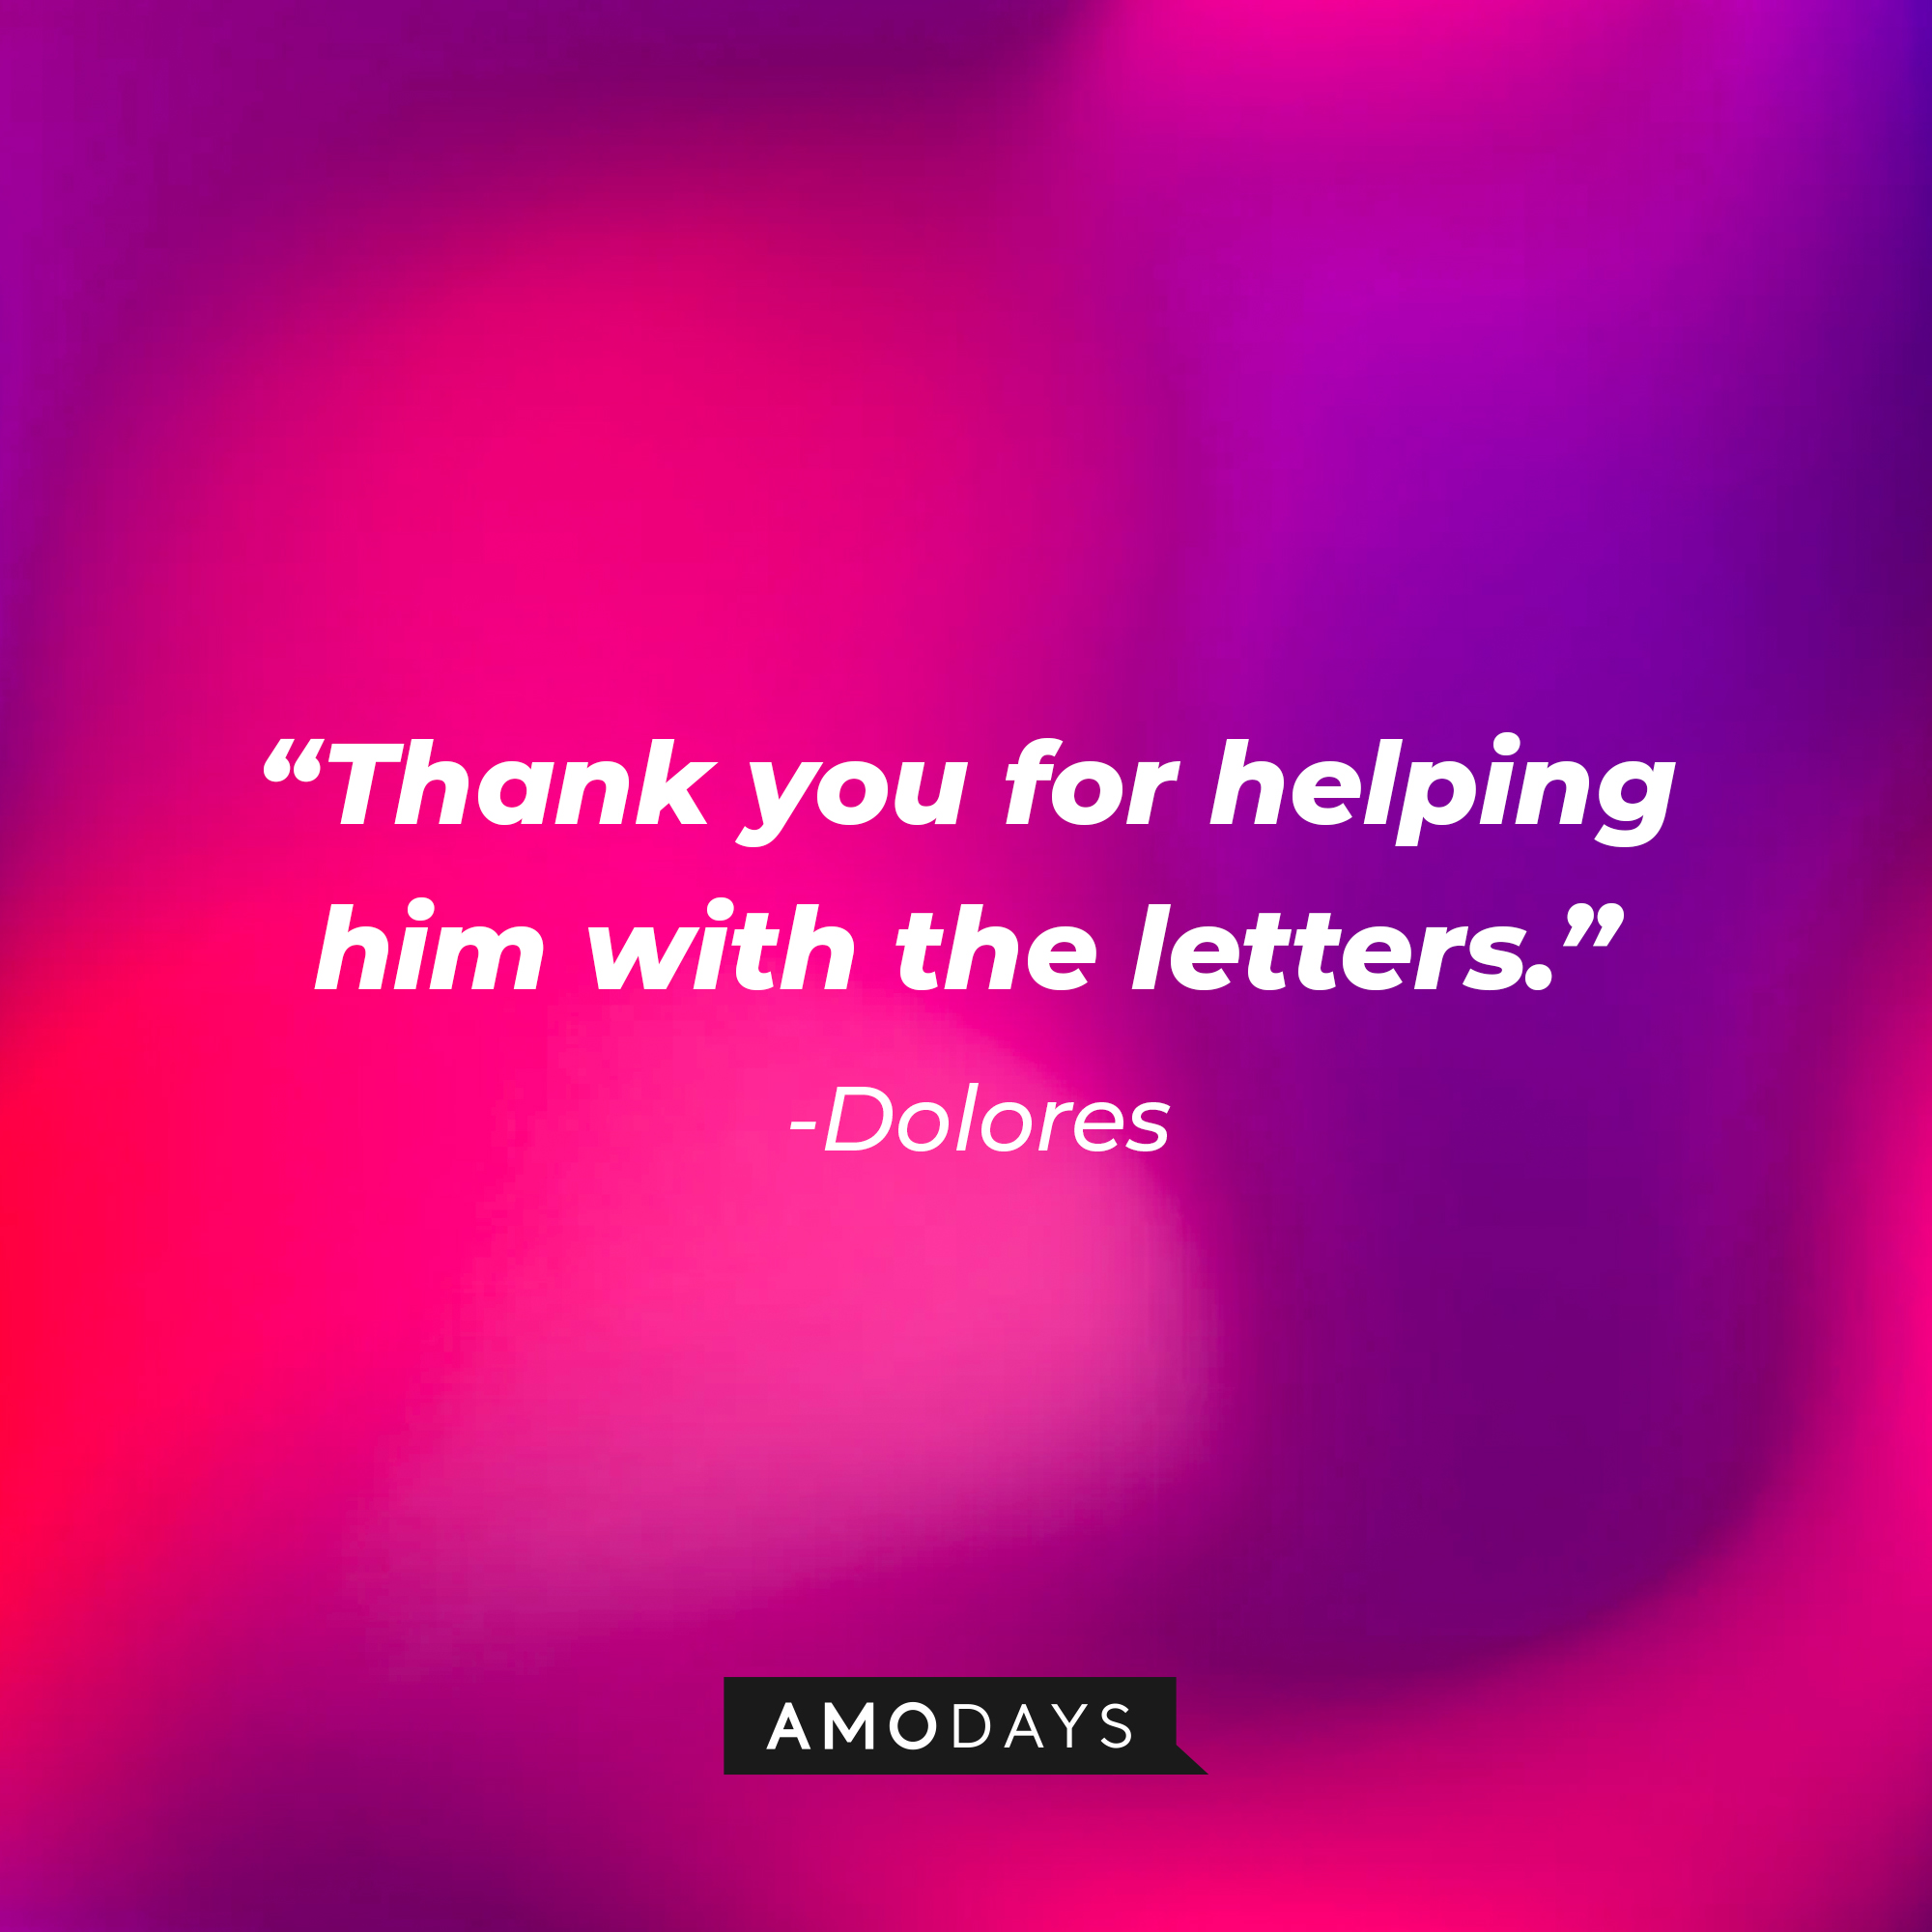 Dolores's quote: “Thank you for helping him with the letters.” | Source: Amodays